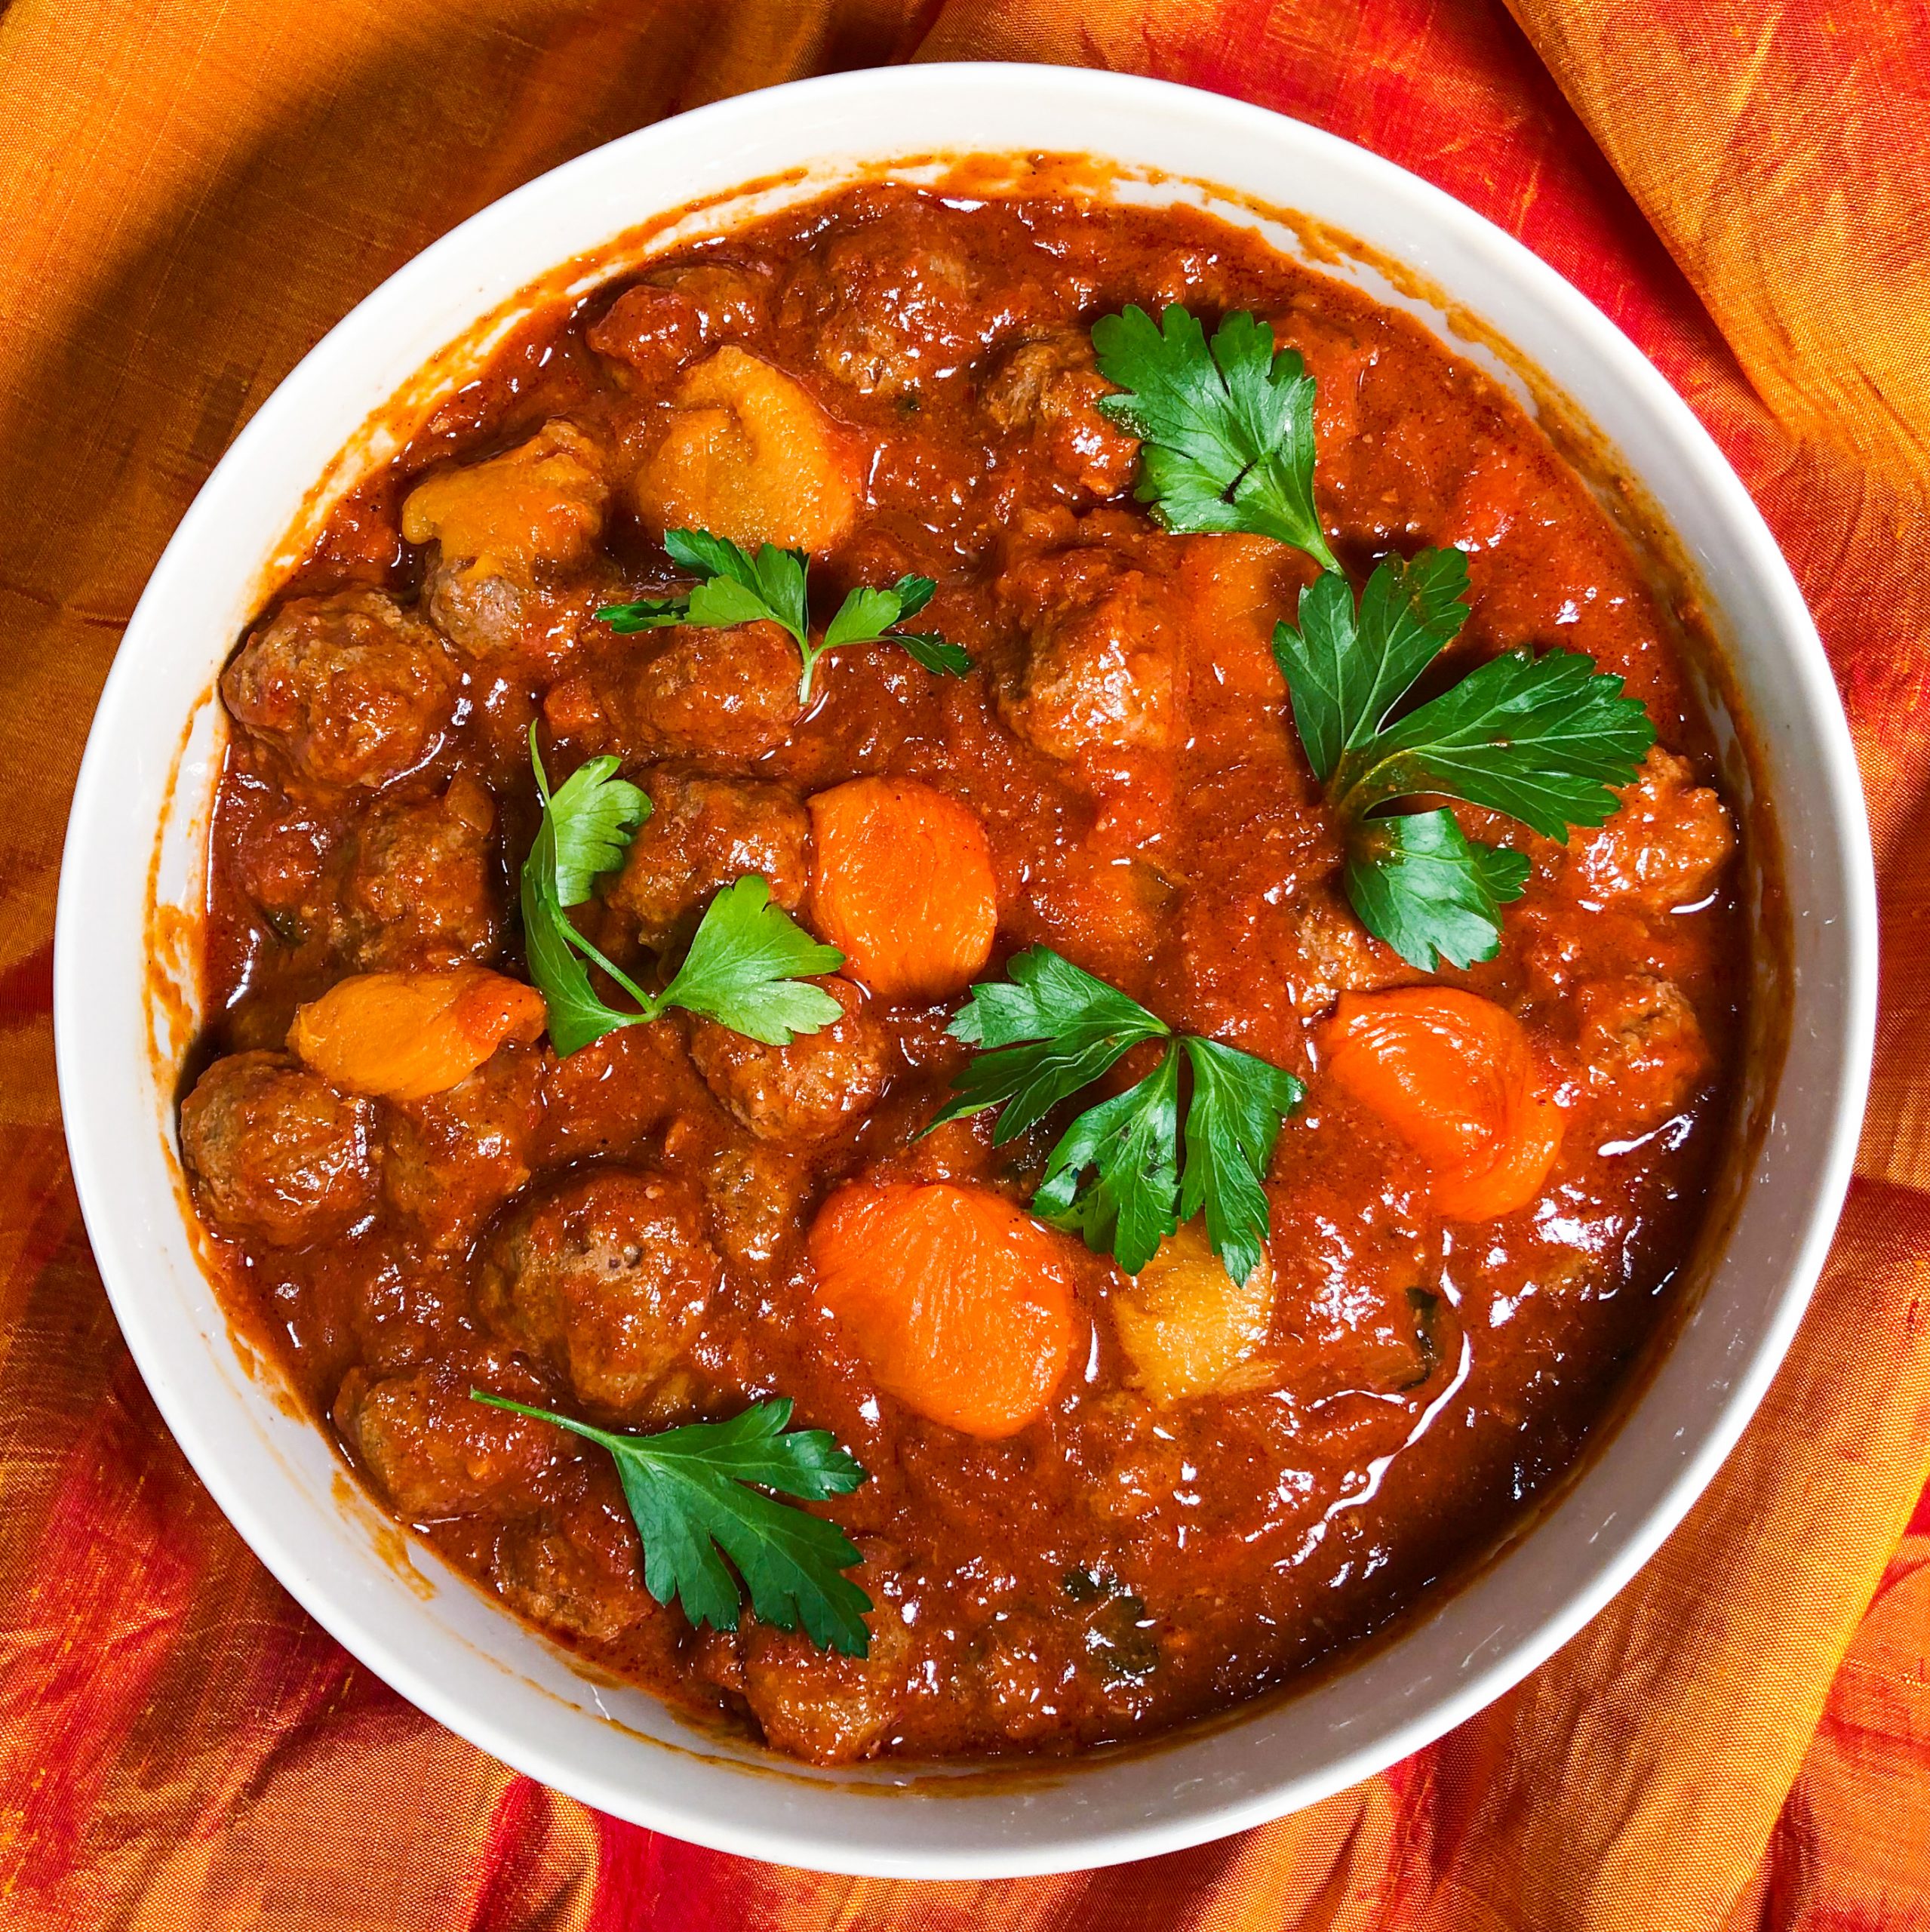 Iraqi Meatballs with Apricots and Tomatoes